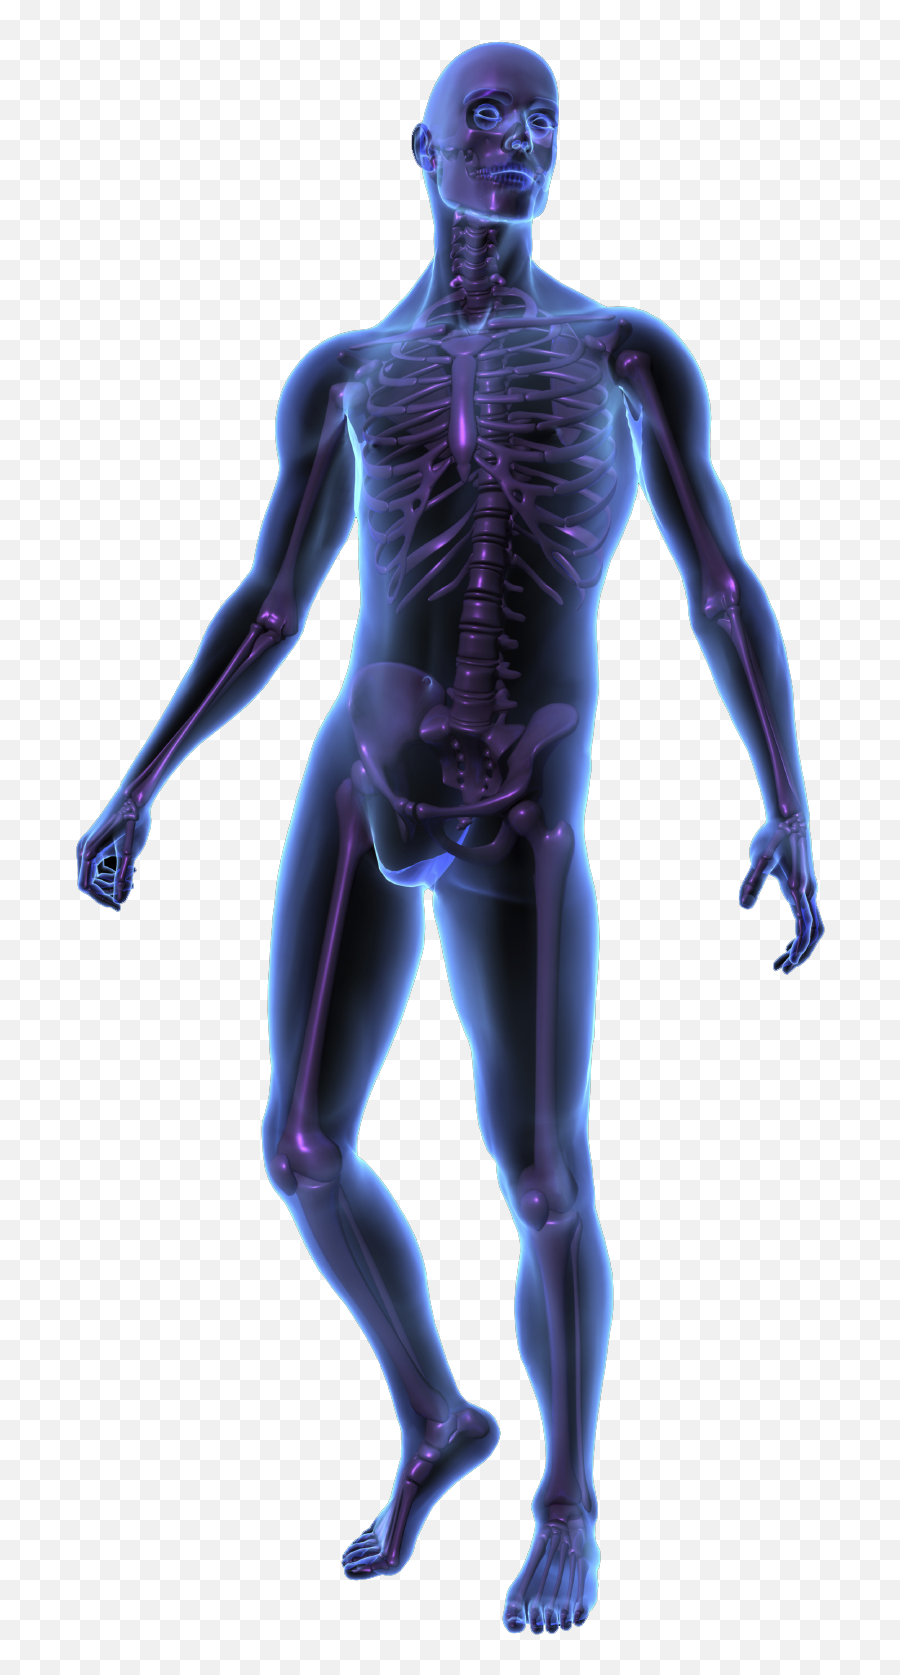 Human Png Images In Collection - X Ray Human Body,Human Png